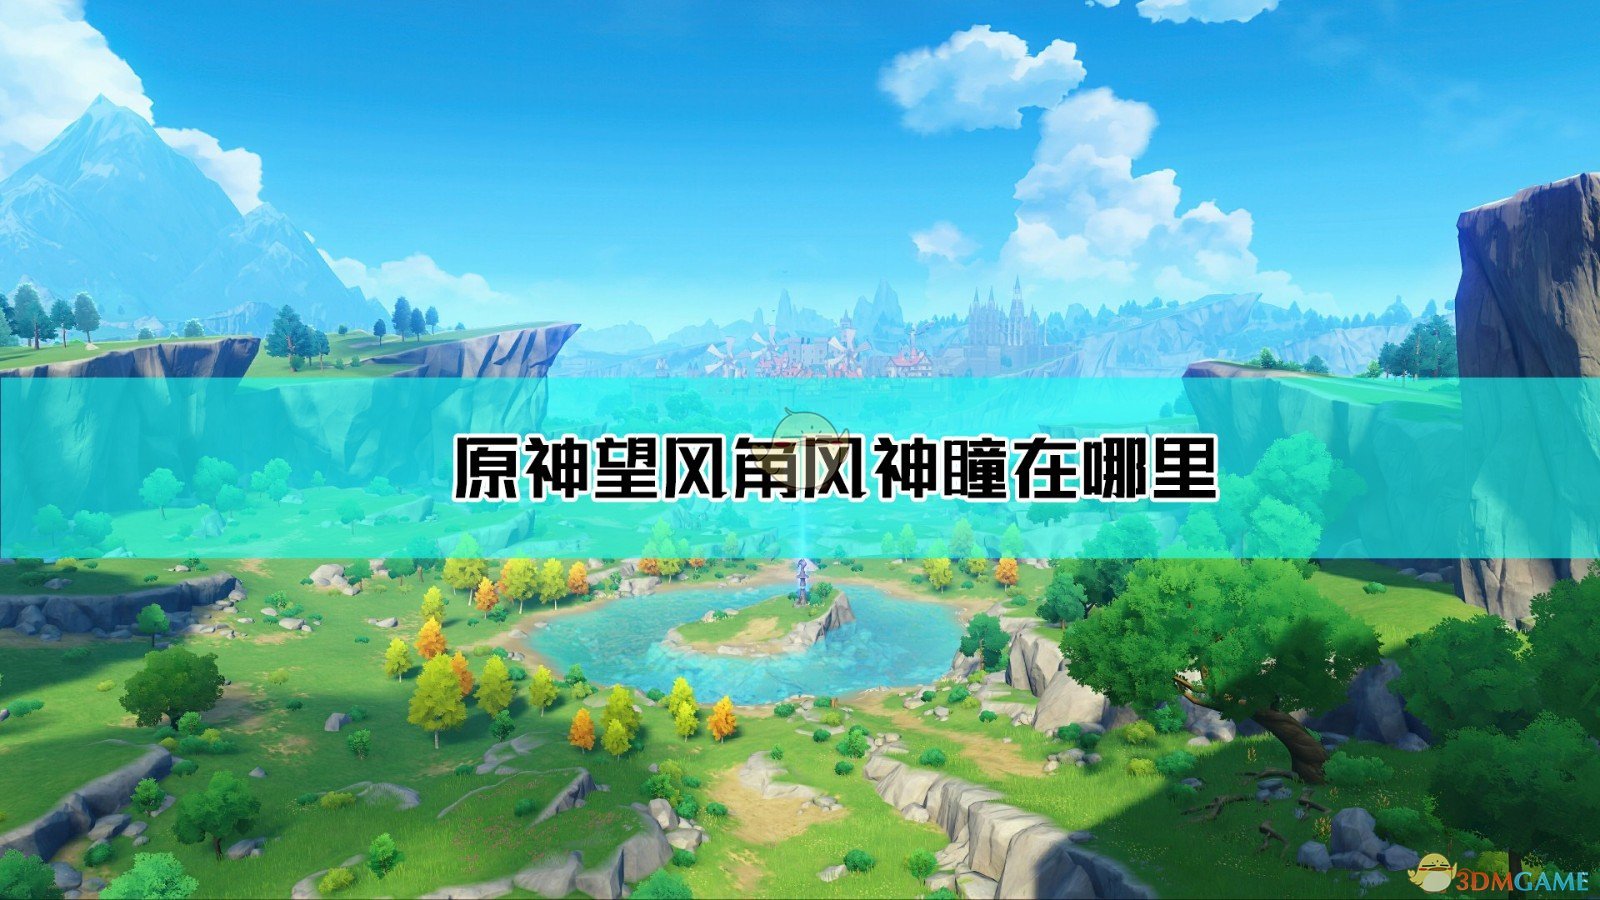  Original God: Map sharing of the location of Fengshen Tong at the Wind Watching Corner